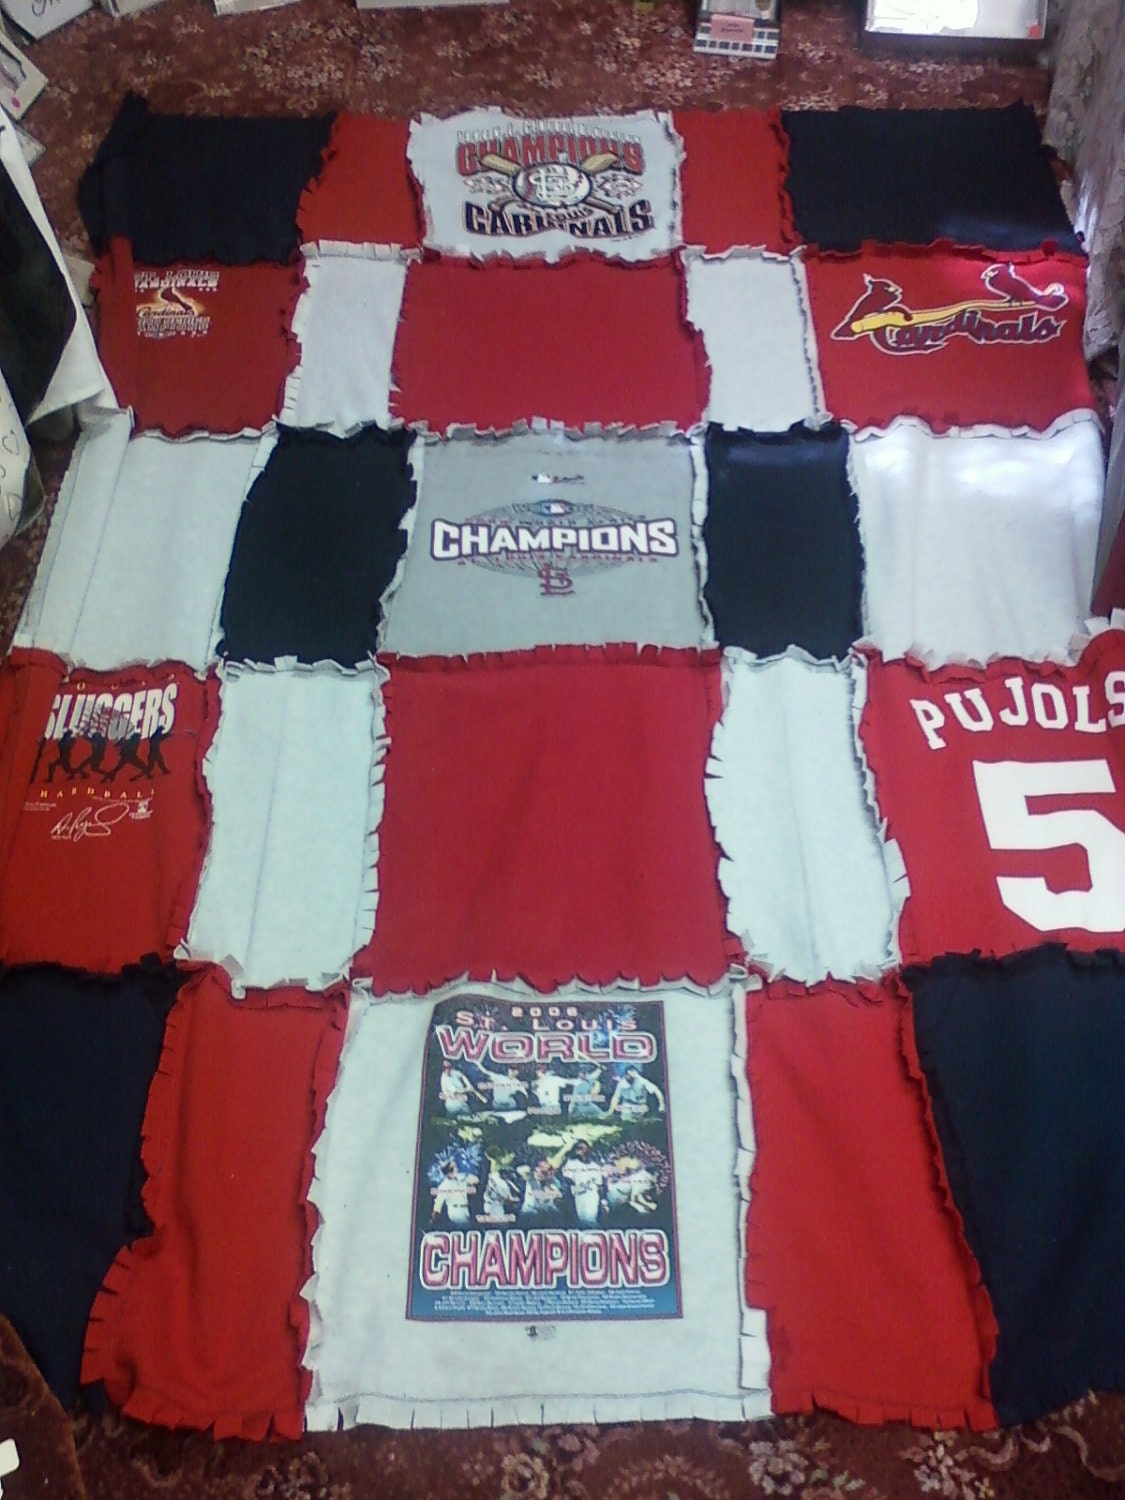 CompareCompareSt. Louis Cardinals Blanketprices and save big onCompareCompareSt. Louis Cardinals Blanketprices and save big onCardinals BlanketsandCompareCompareSt. Louis Cardinals Blanketprices and save big onCompareCompareSt. Louis Cardinals Blanketprices and save big onCardinals BlanketsandSt. Louis CardinalsBedding by scanning prices from top retailers.